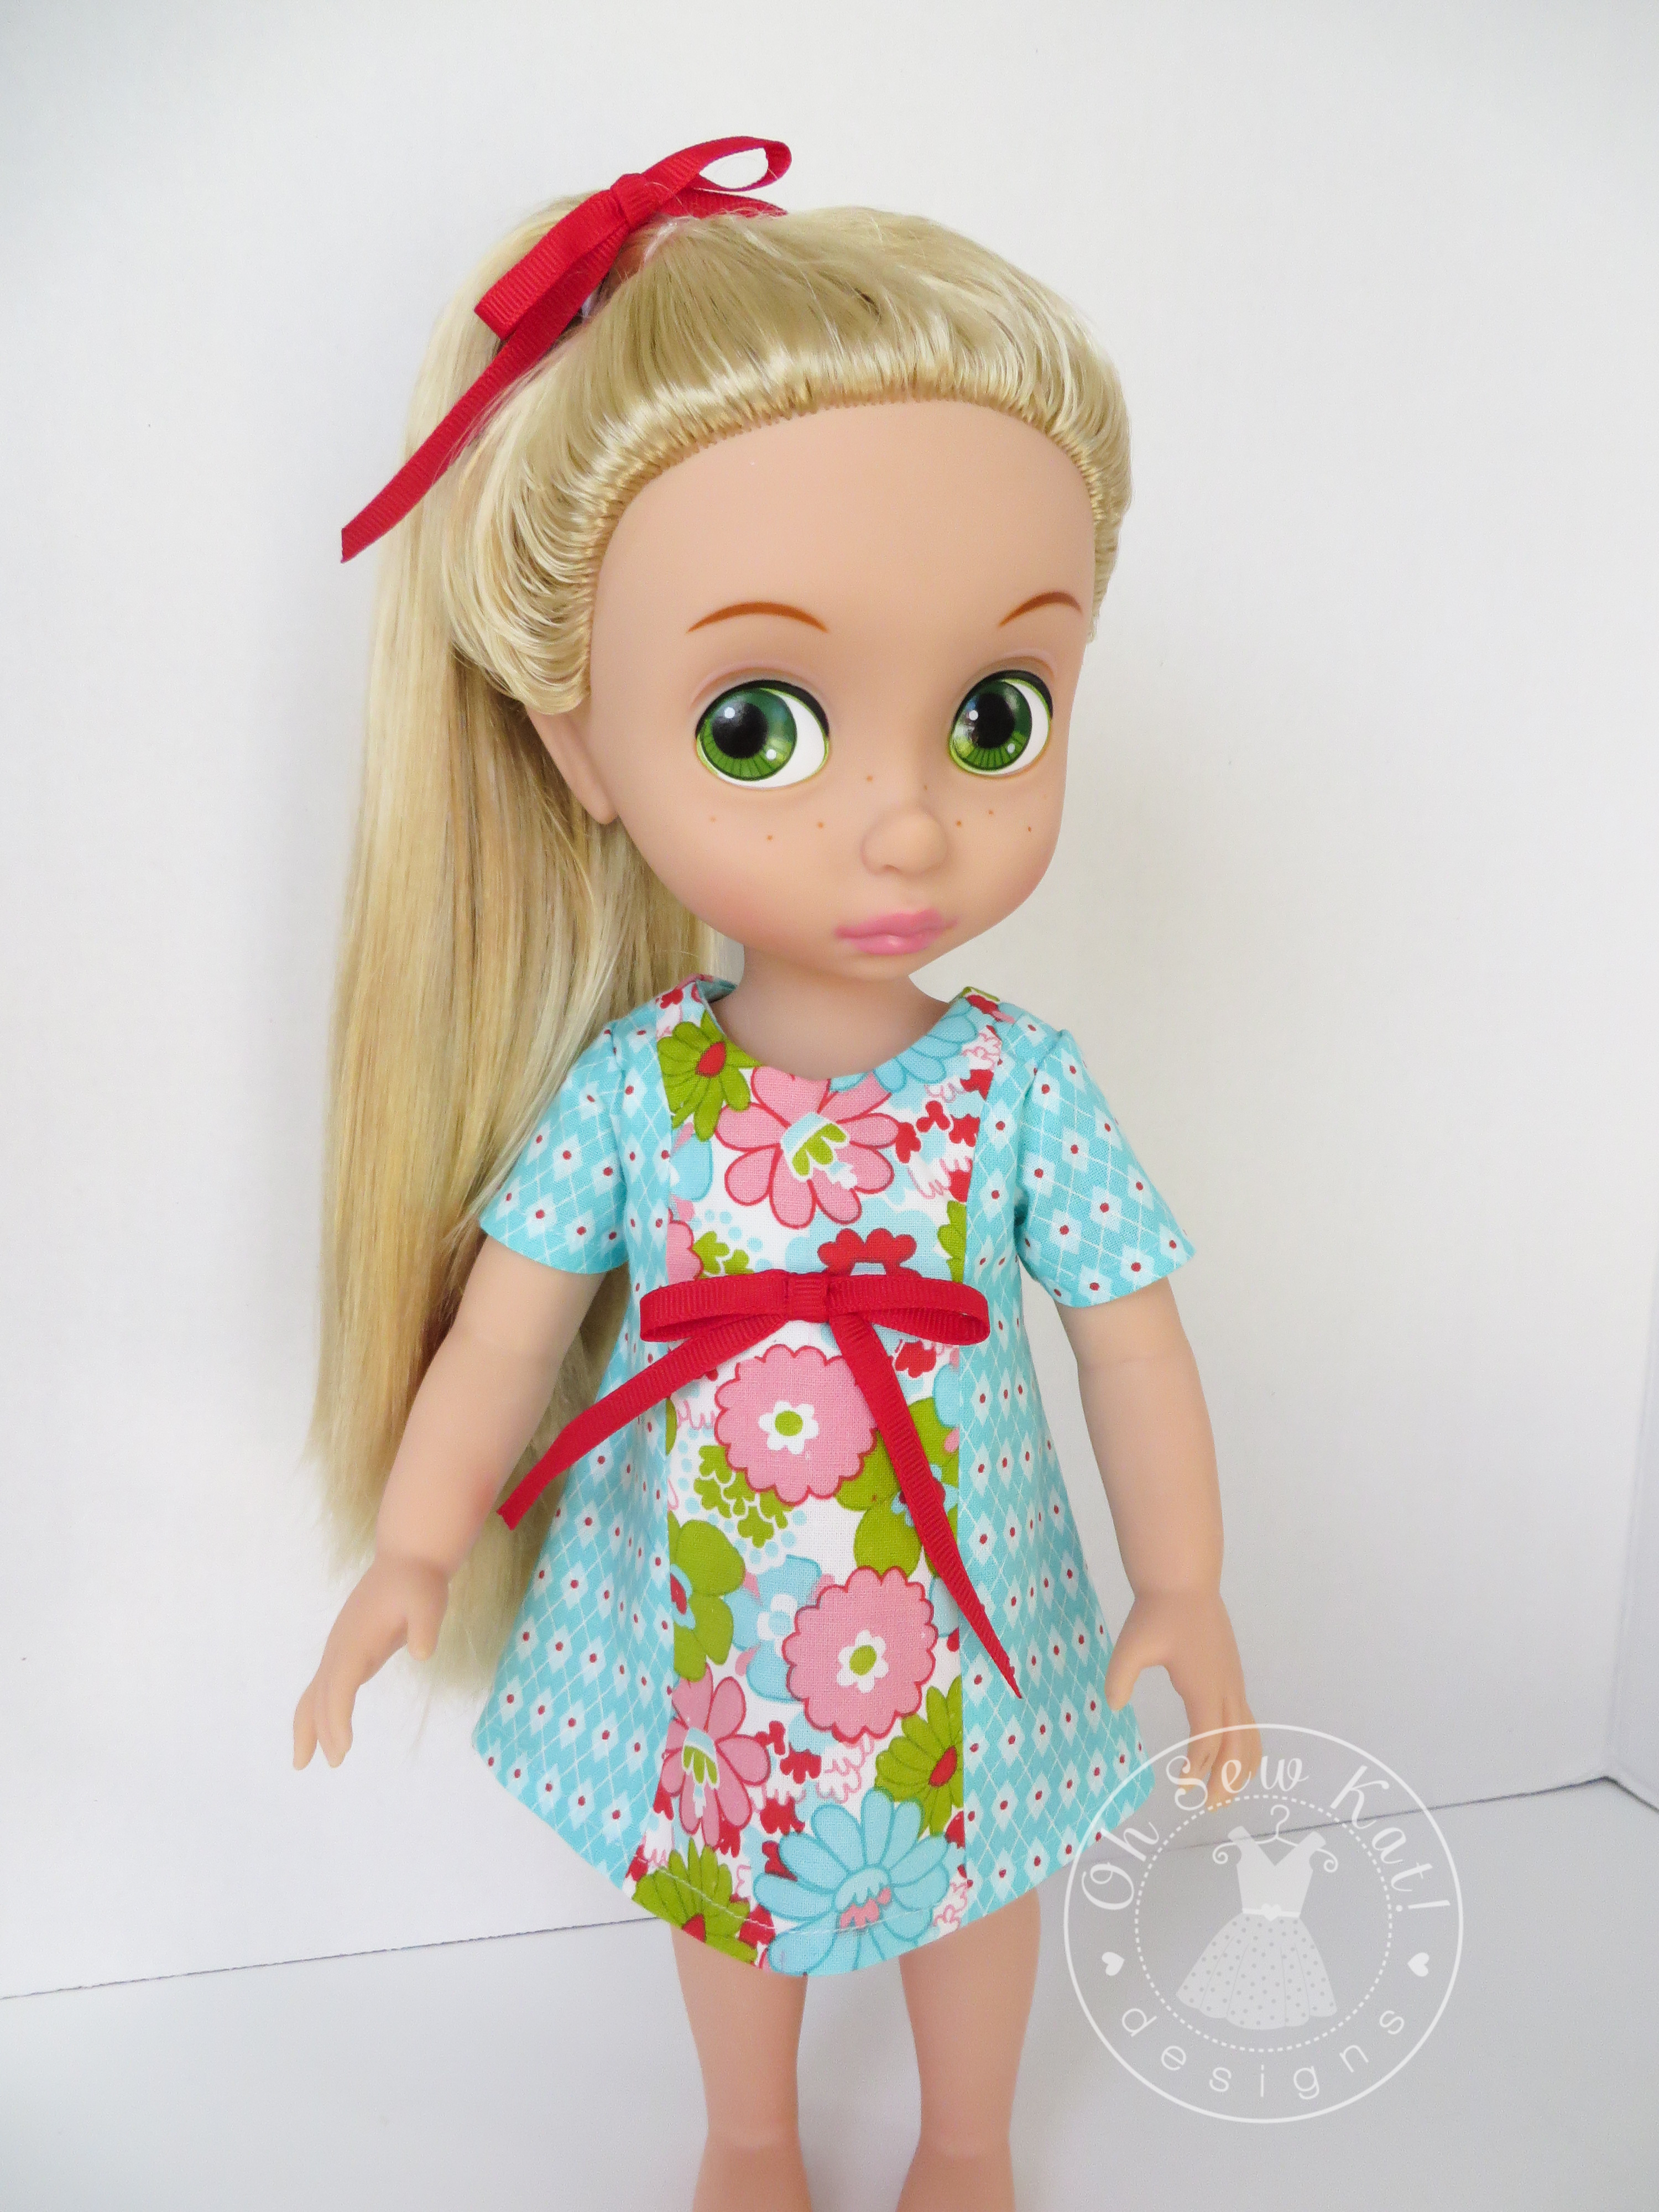 Make a simple summer dress for your 18 inch doll with the Sunshine Dress PDF Pattern from OhSewKat! Also available for 16 inch dolls like Animators. #dollclothes #sewingpattern #summerclothes #dolloutfit #sunshinedress #ohsewkat #animators